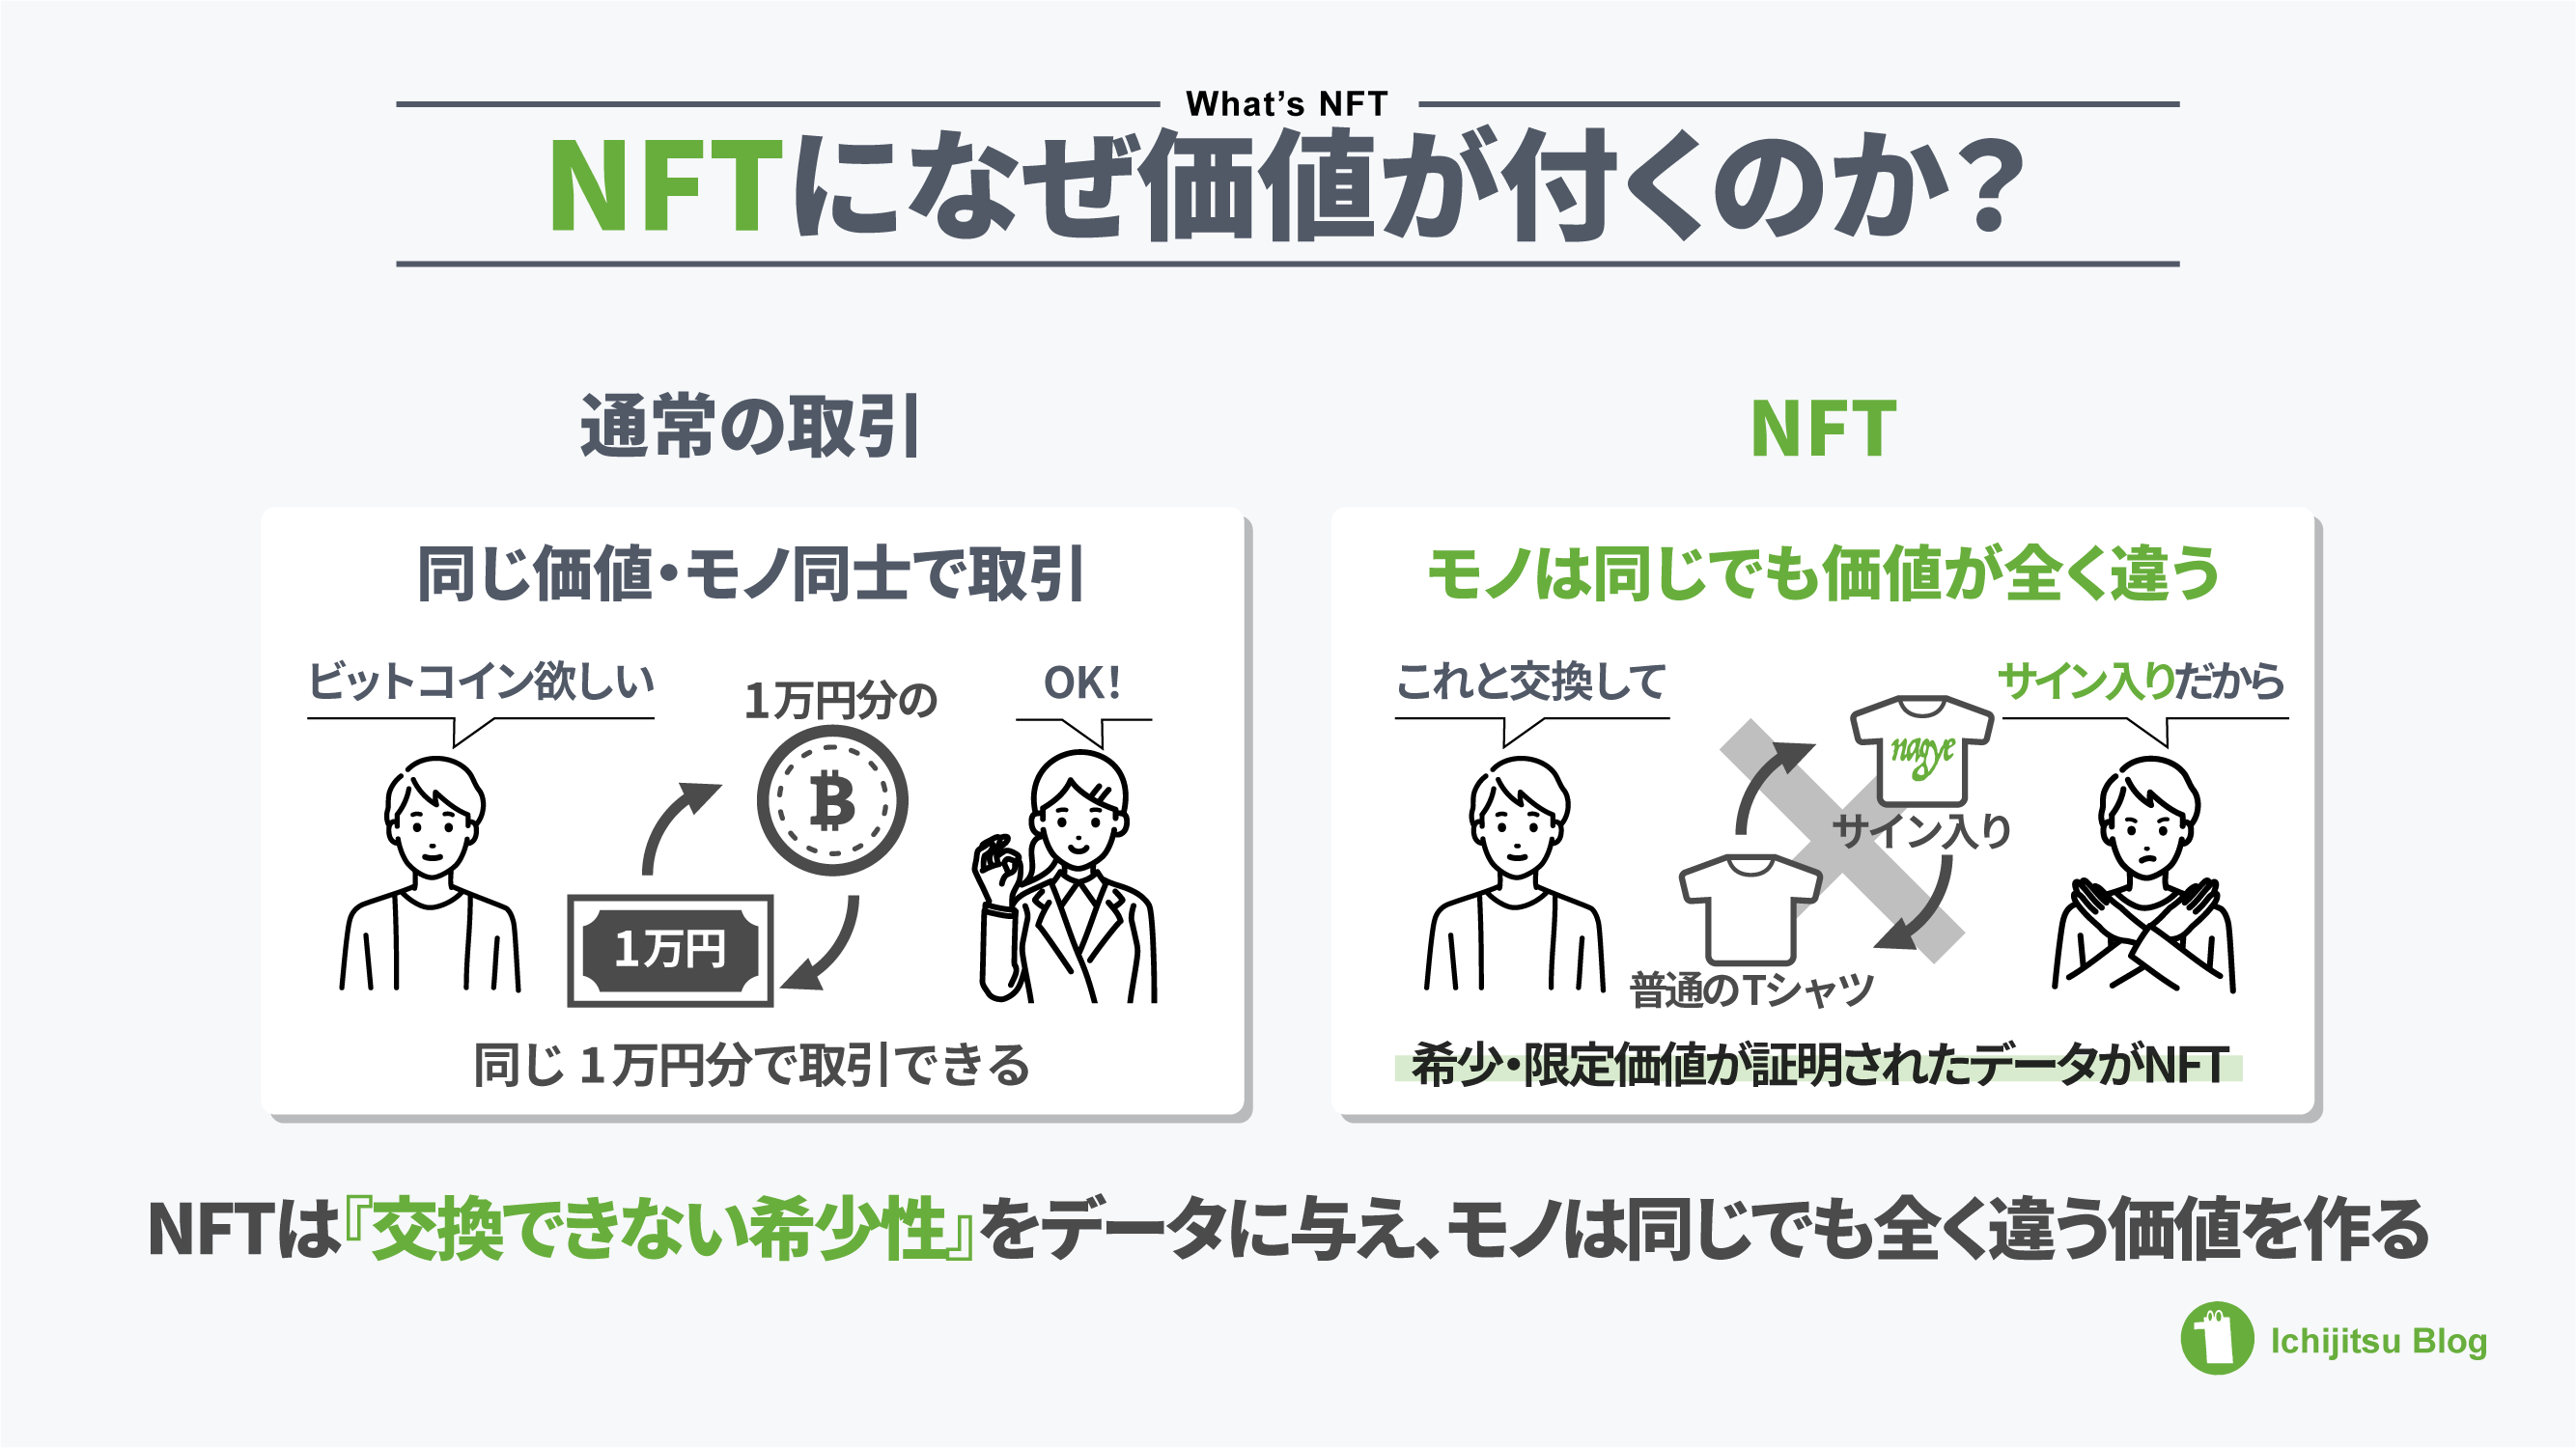 Why does the NFT add value? illustration